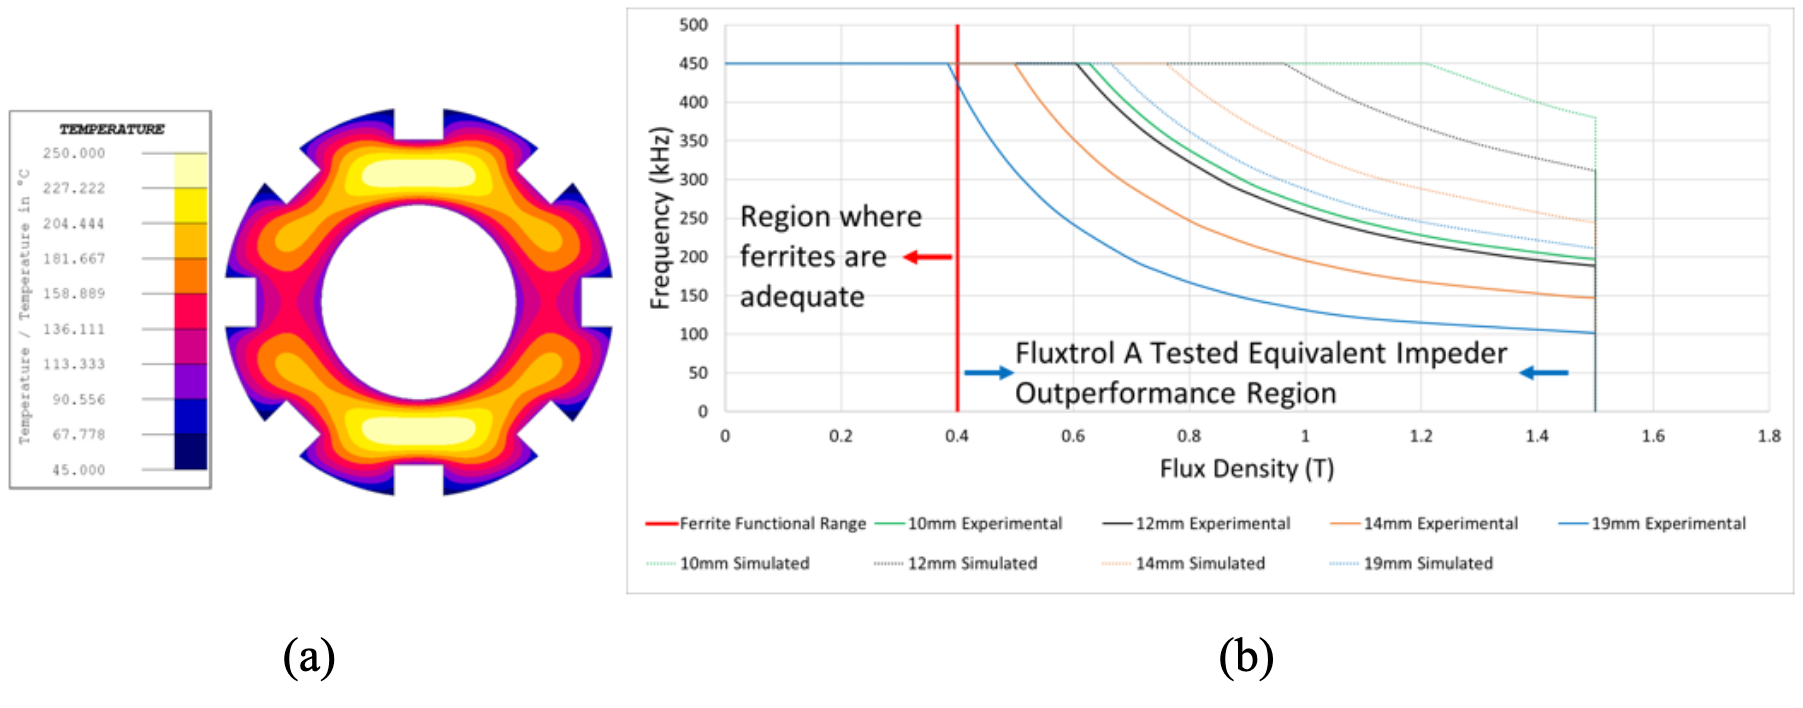 Fluxtrol | HES 23 Physical Simulation and Computational Modelling for Validation of Soft Magnetic Composite Impeder Performance - Figure 4: (a) cross-section of 12mm Fluxtrol A impeder and (b) Fluxtrol A theoretical limits.